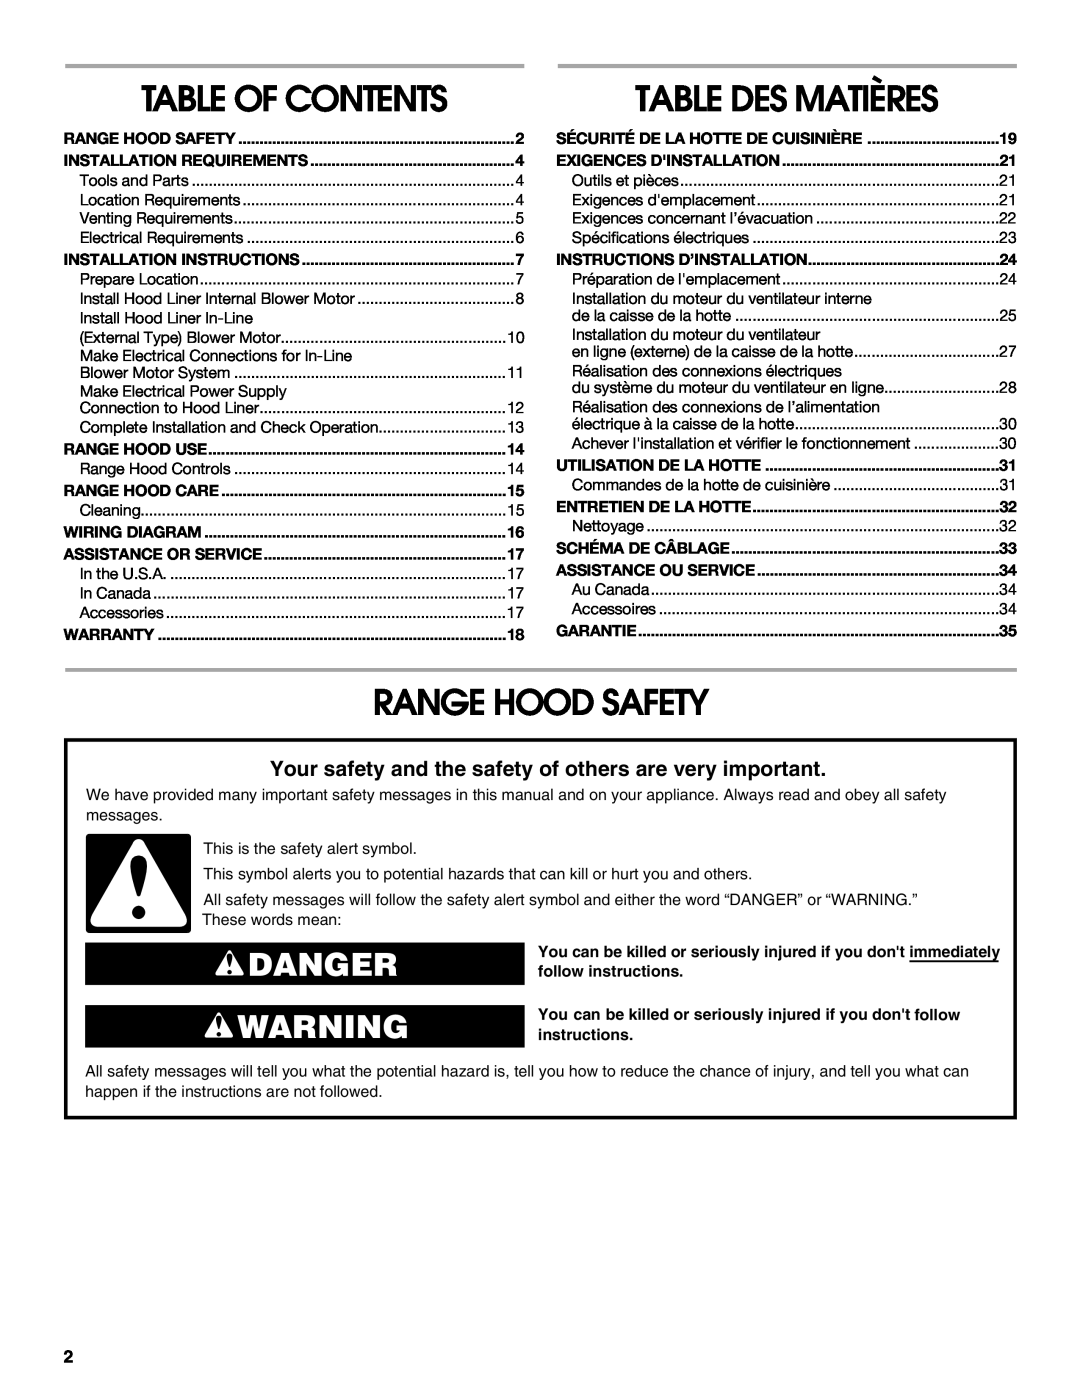 Whirlpool 48 Range Hood Safety, Table Des Matières, Danger, Table Of Contents, Installation Requirements, Range Hood Use 